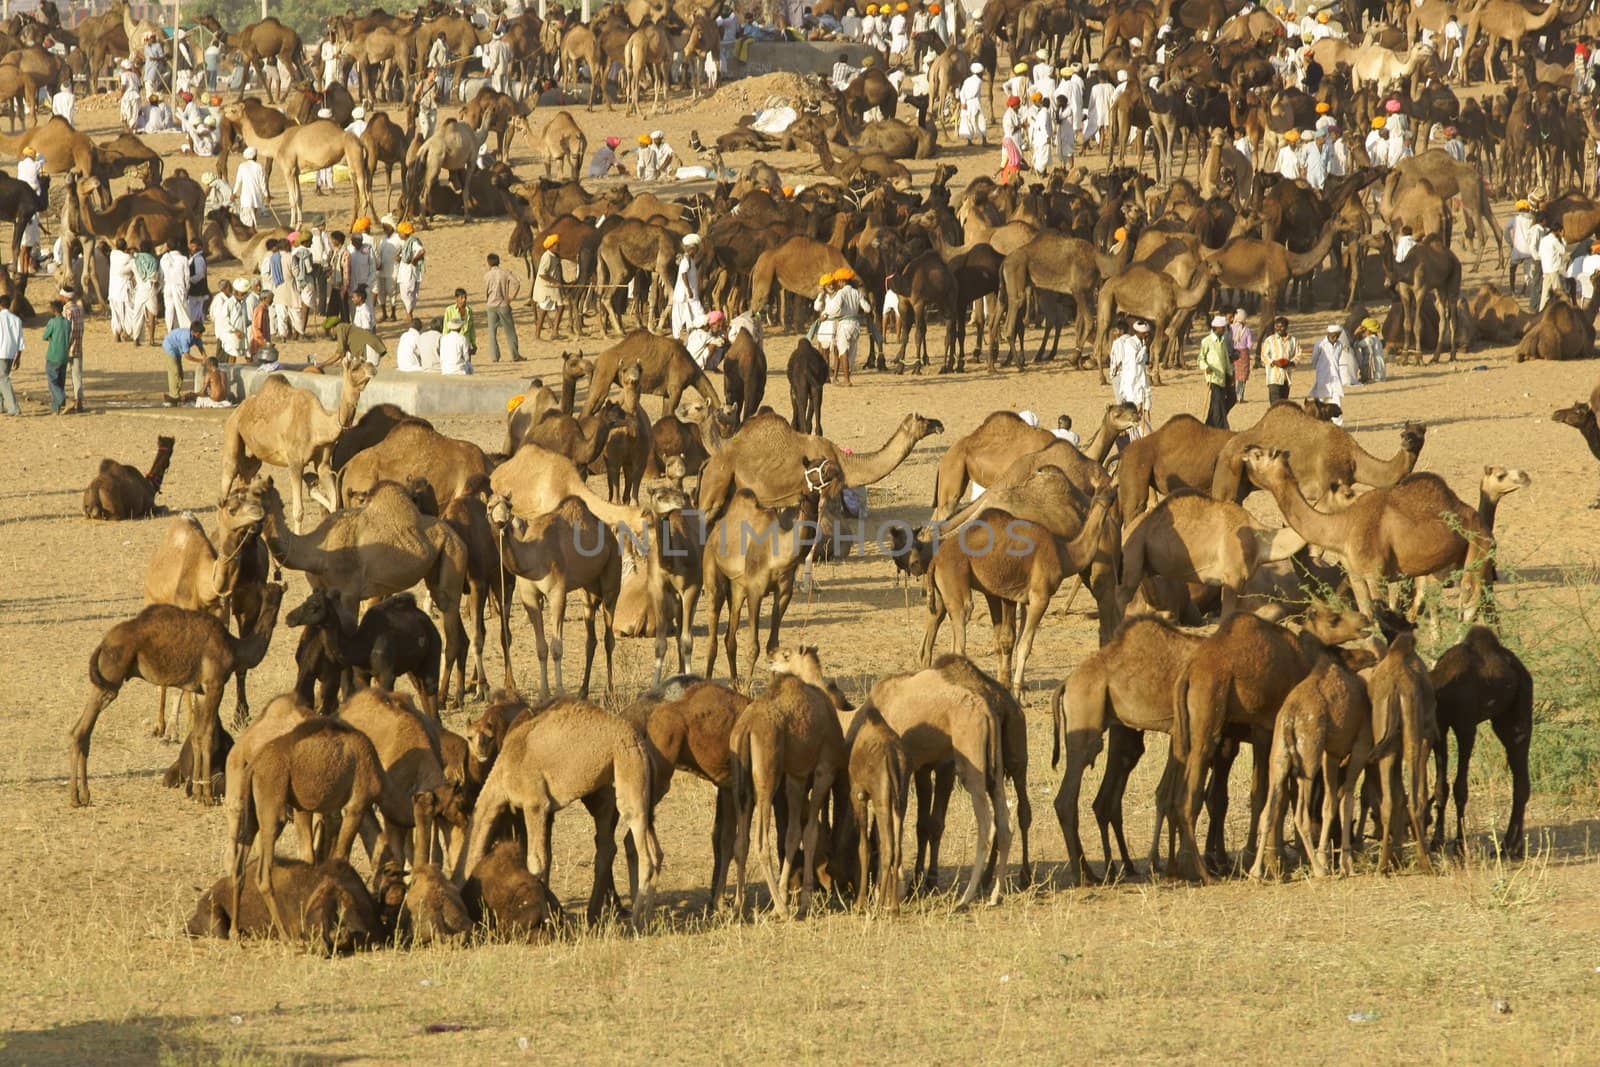 Camels as far as the eye can see at the annual livestock fair in Pushkar, Rajasthan, India.